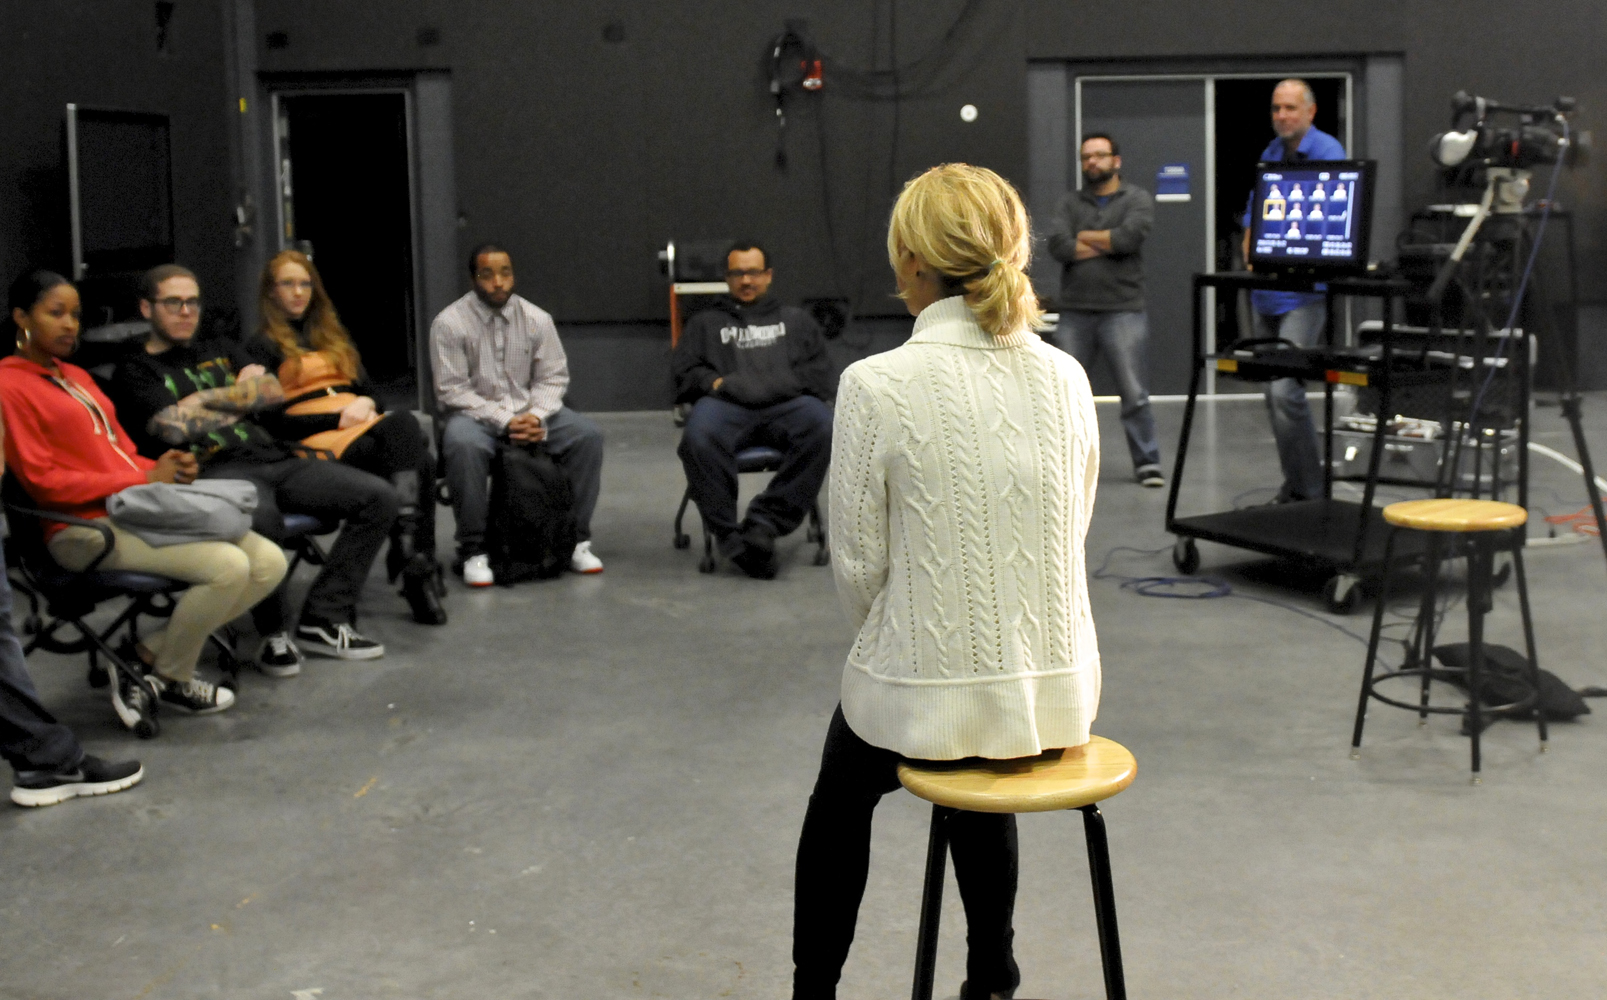 FX Actress Kelly Carlson chats with students at ODU